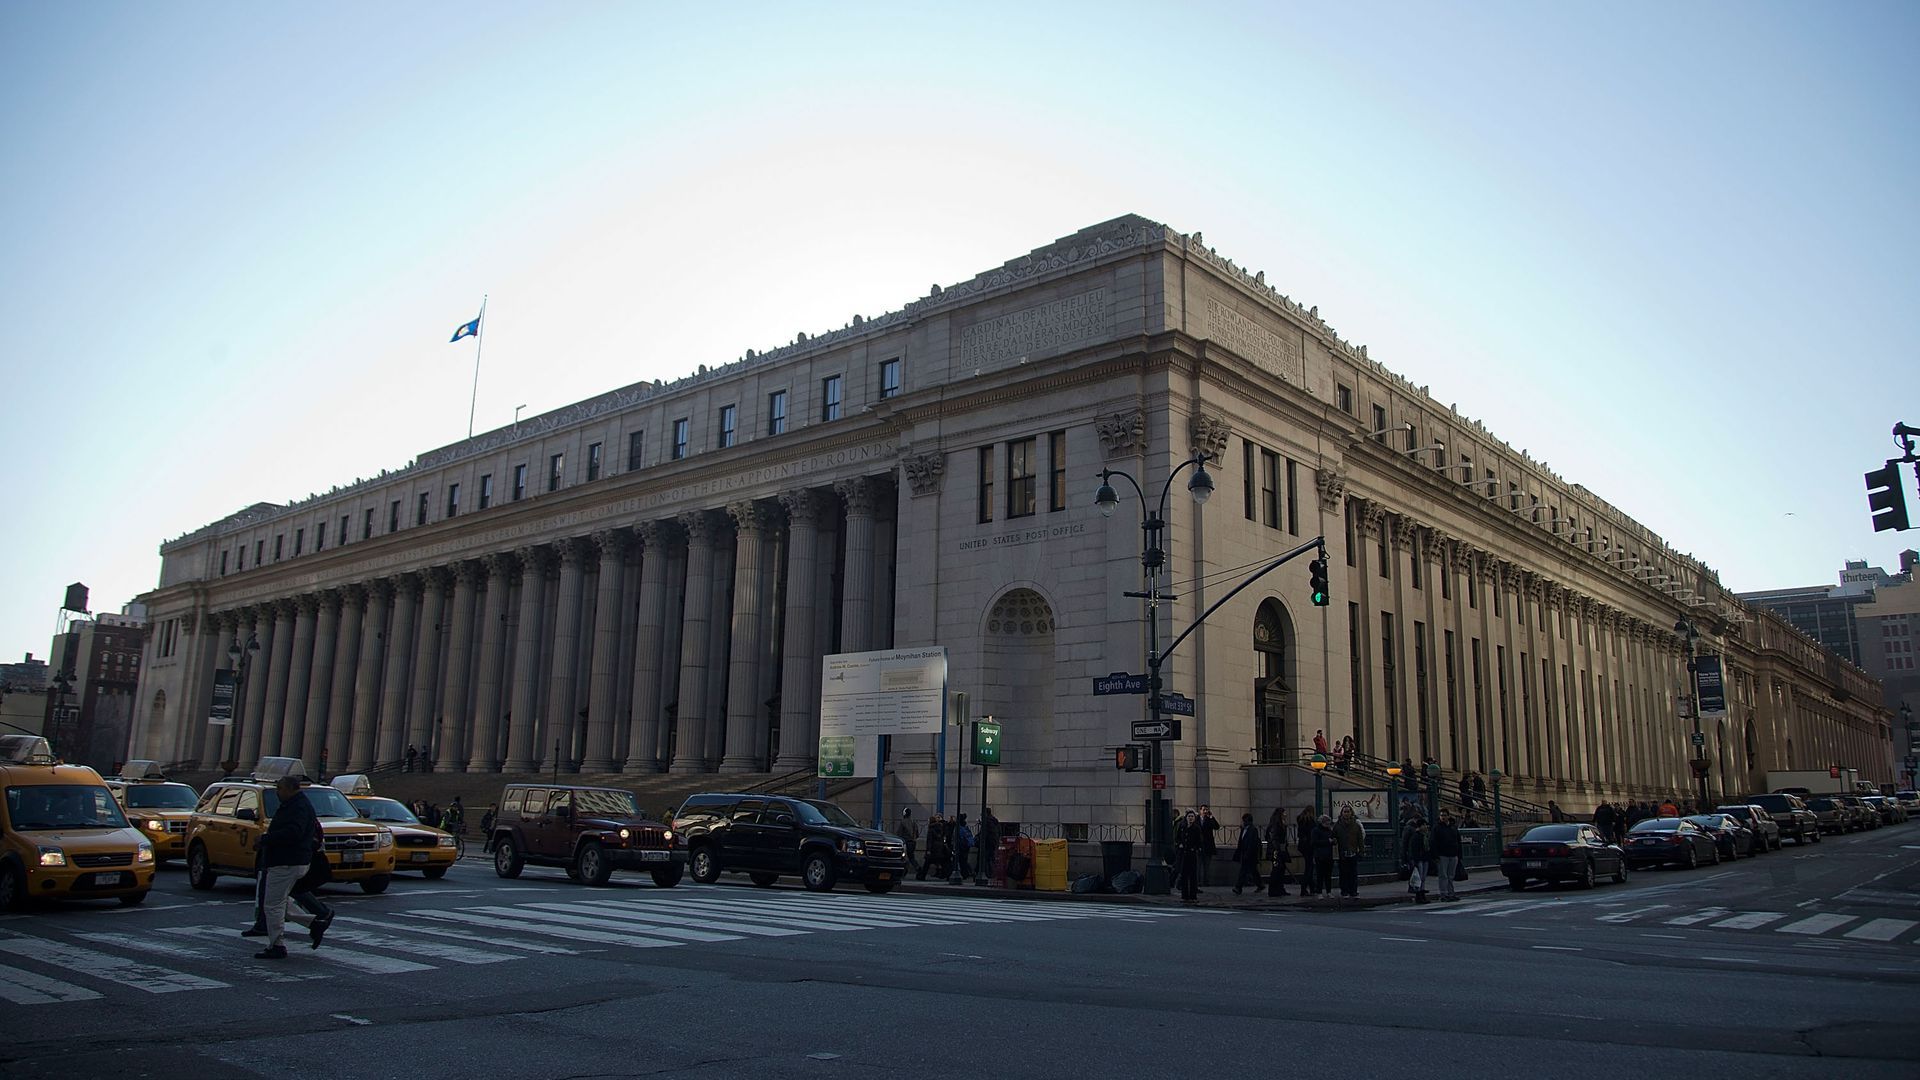 Facebook leased a whopping 730,000 square feet in Manhattan's iconic Farley building in 2020.